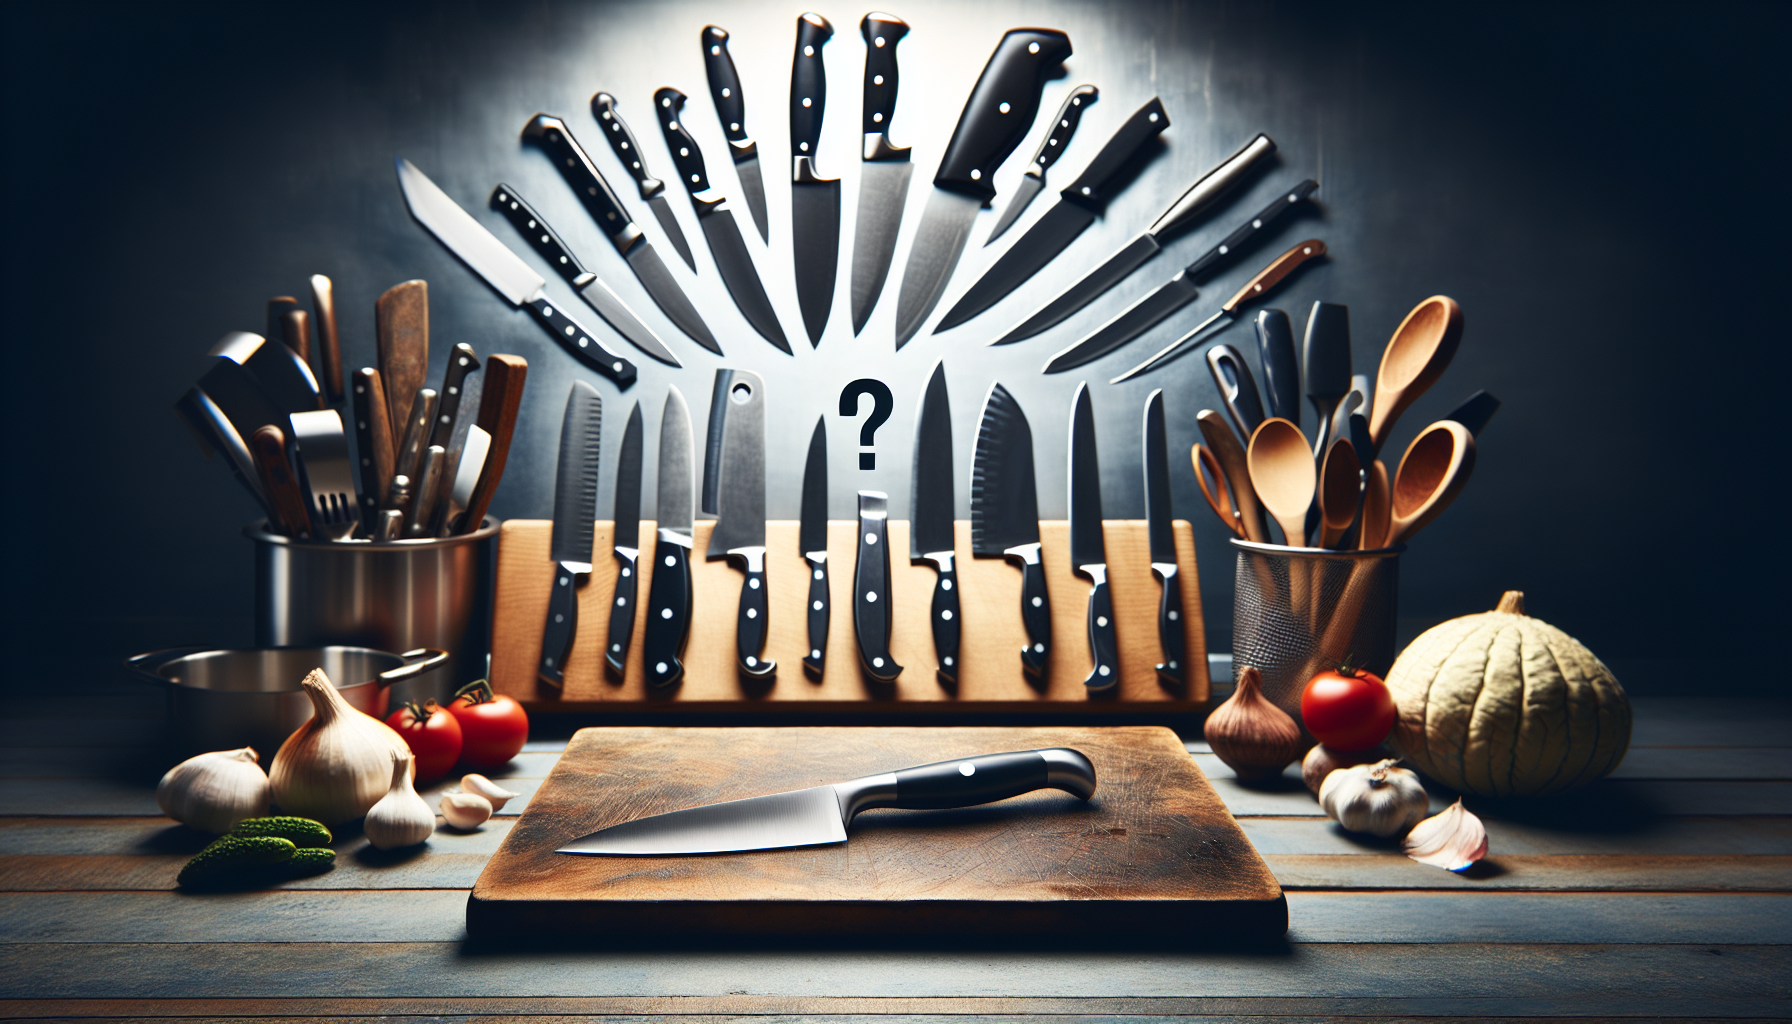 What Is The 2nd Most Important Knife?